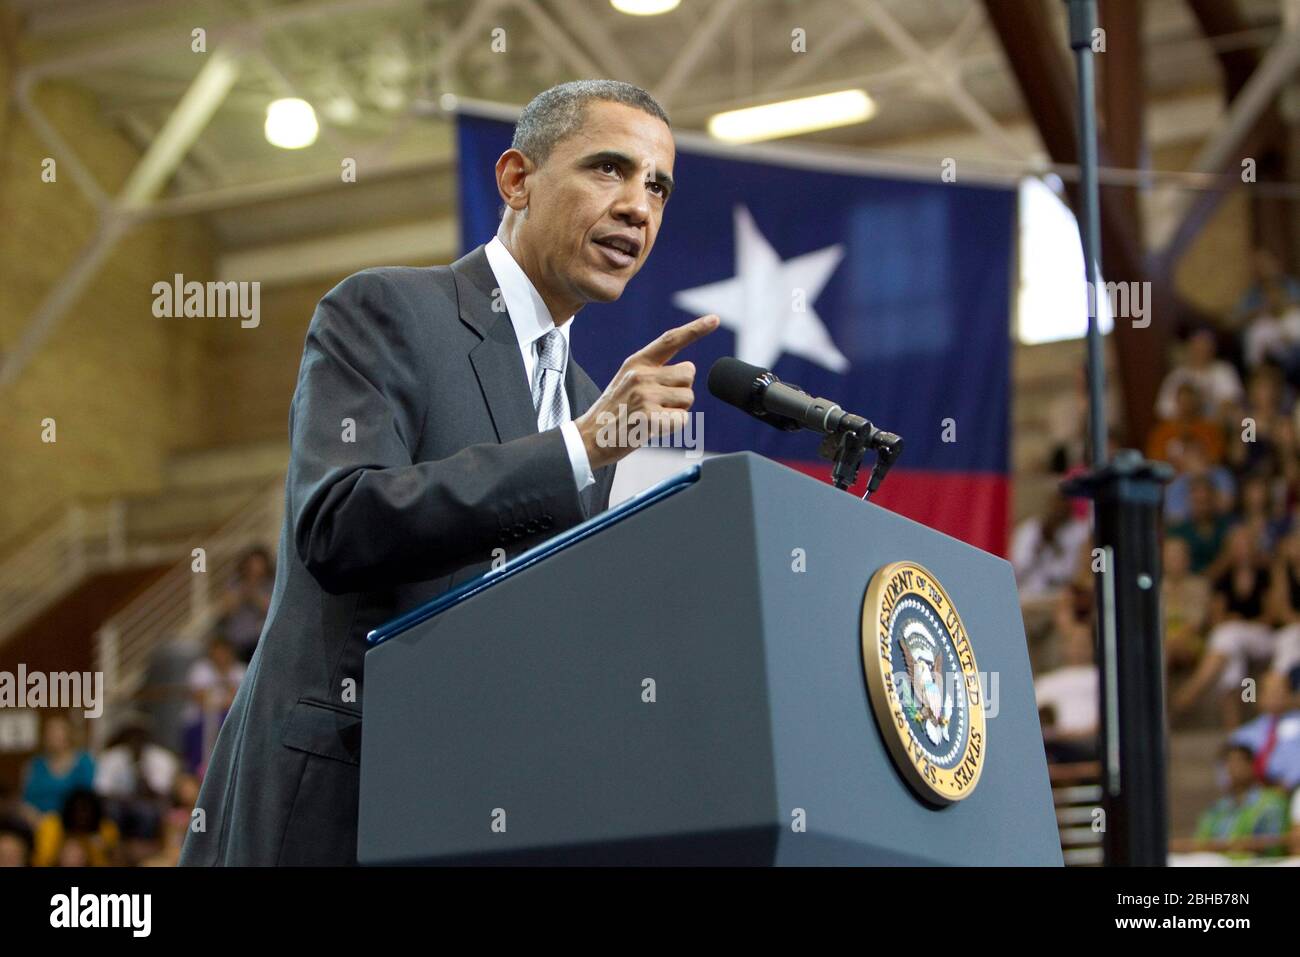 Austin Texas USA, Aug. 9 2010: U.S. Pres. Barack Obama speaks to a college student-heavy audience during an address in Gregory Gym at the University of Texas at Austin. Stock Photo